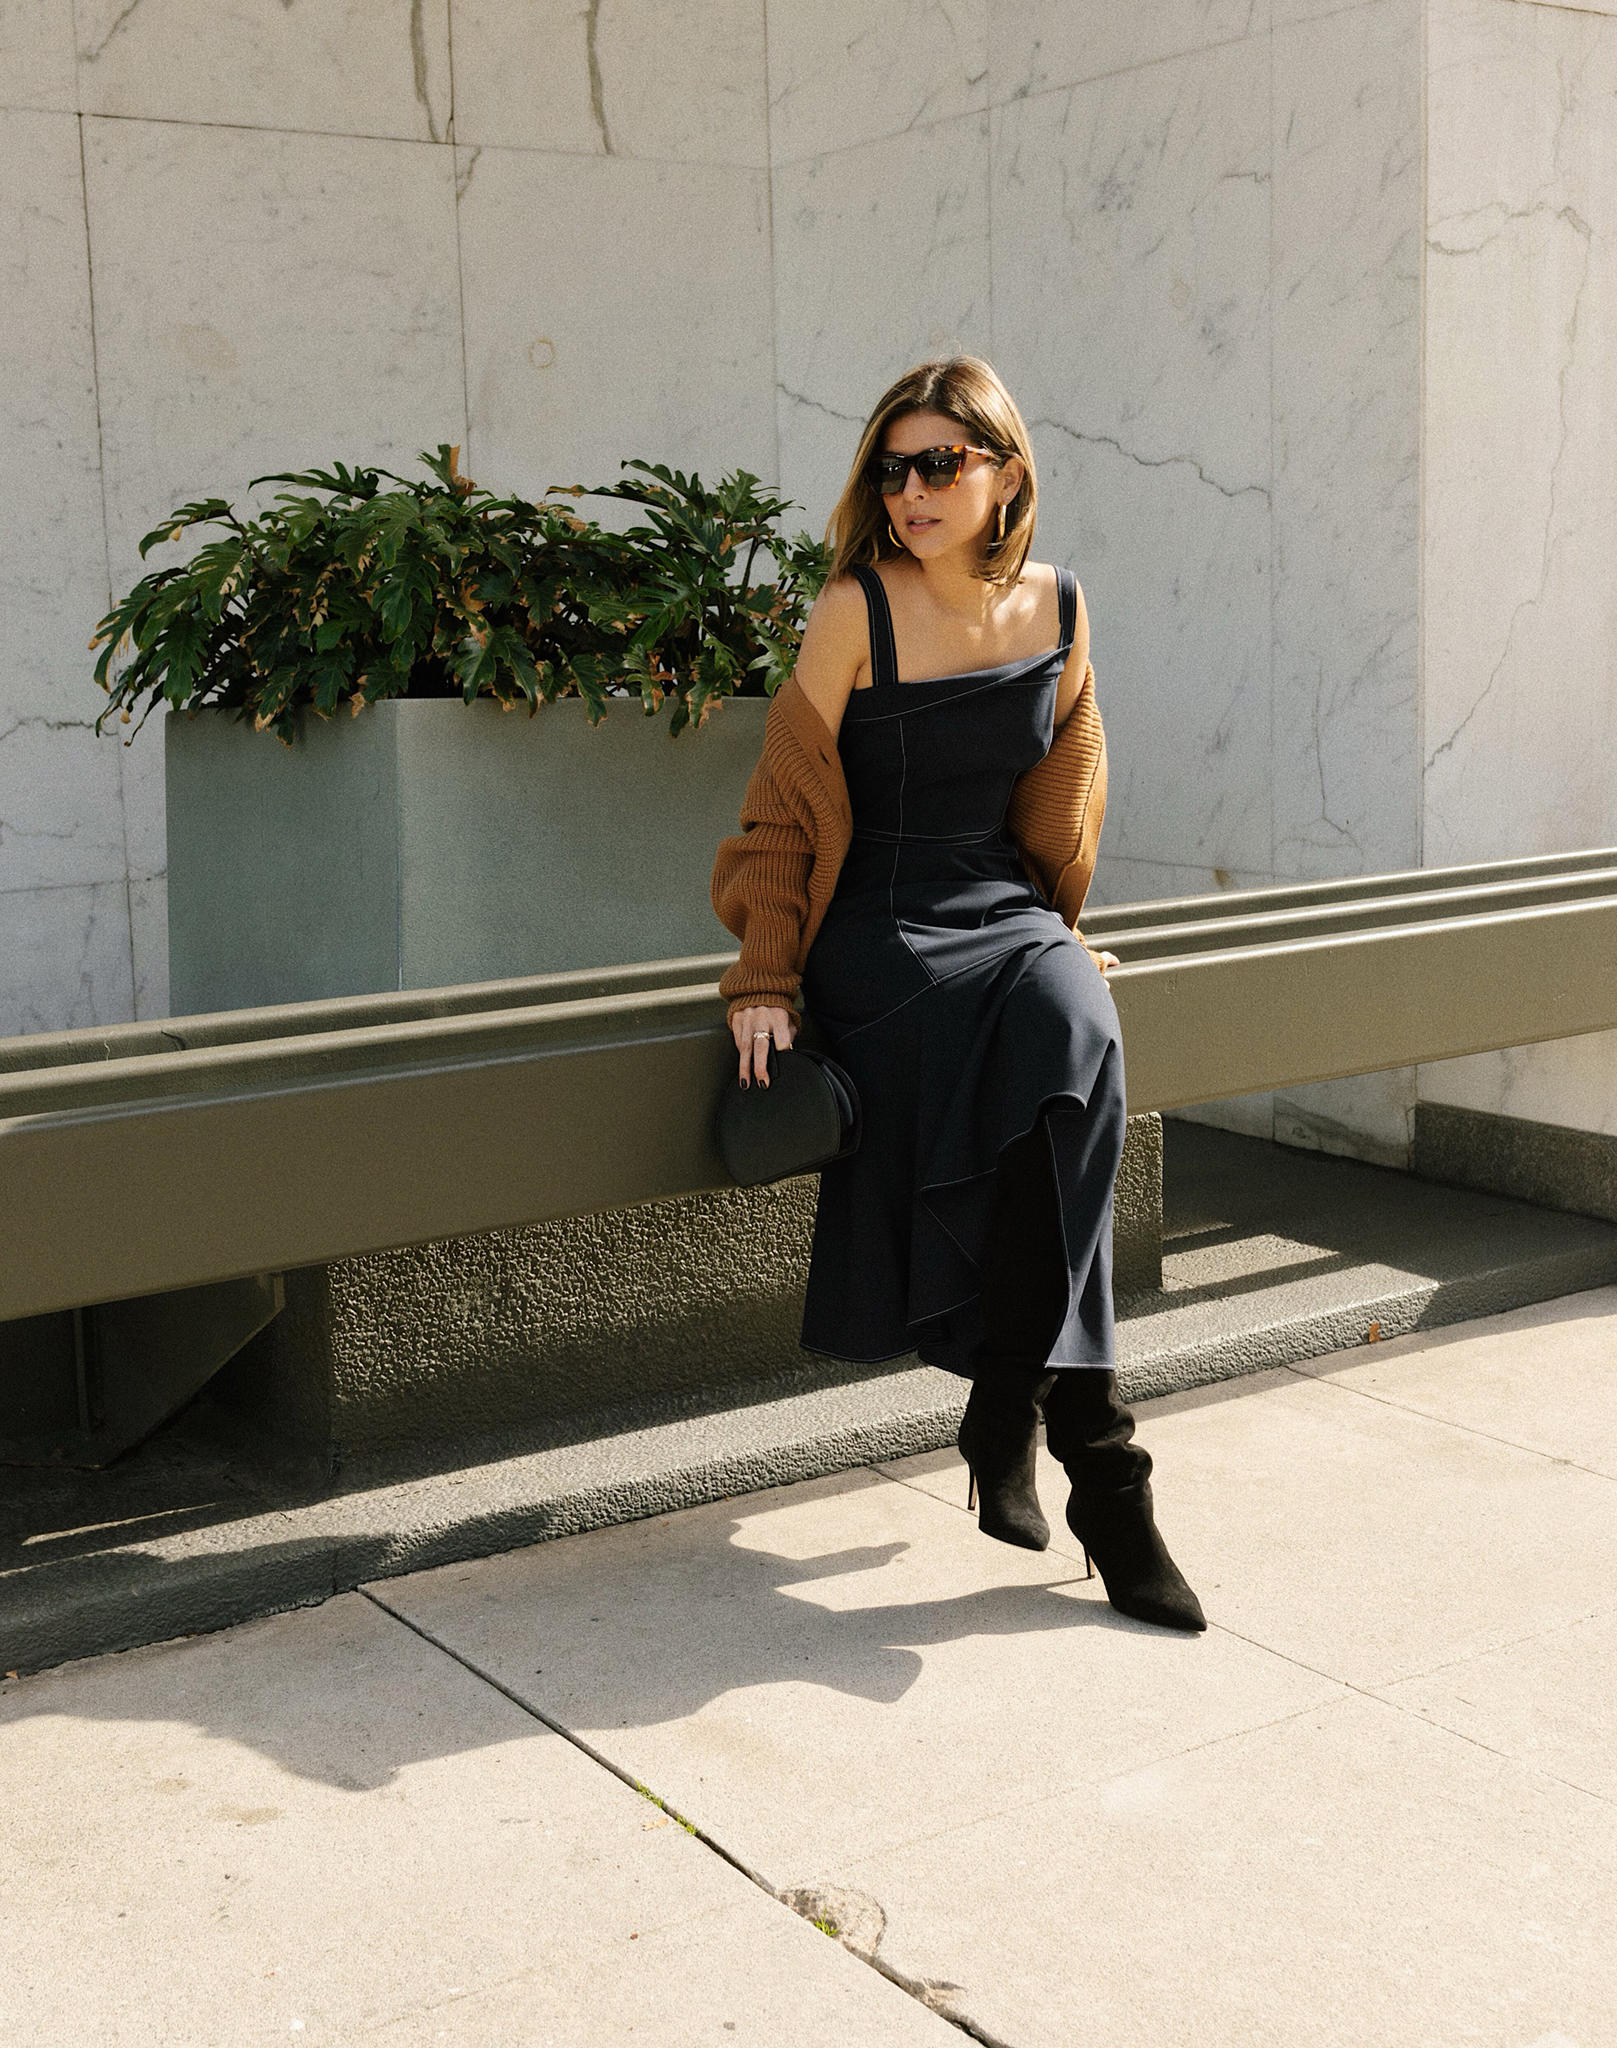 How to Wear Dress with Boots by Pam Hetlinger | TheGirlFromPanama.com | Adeam Cardigan, Adeam Dress, slouchy boots, dress with boots outfit